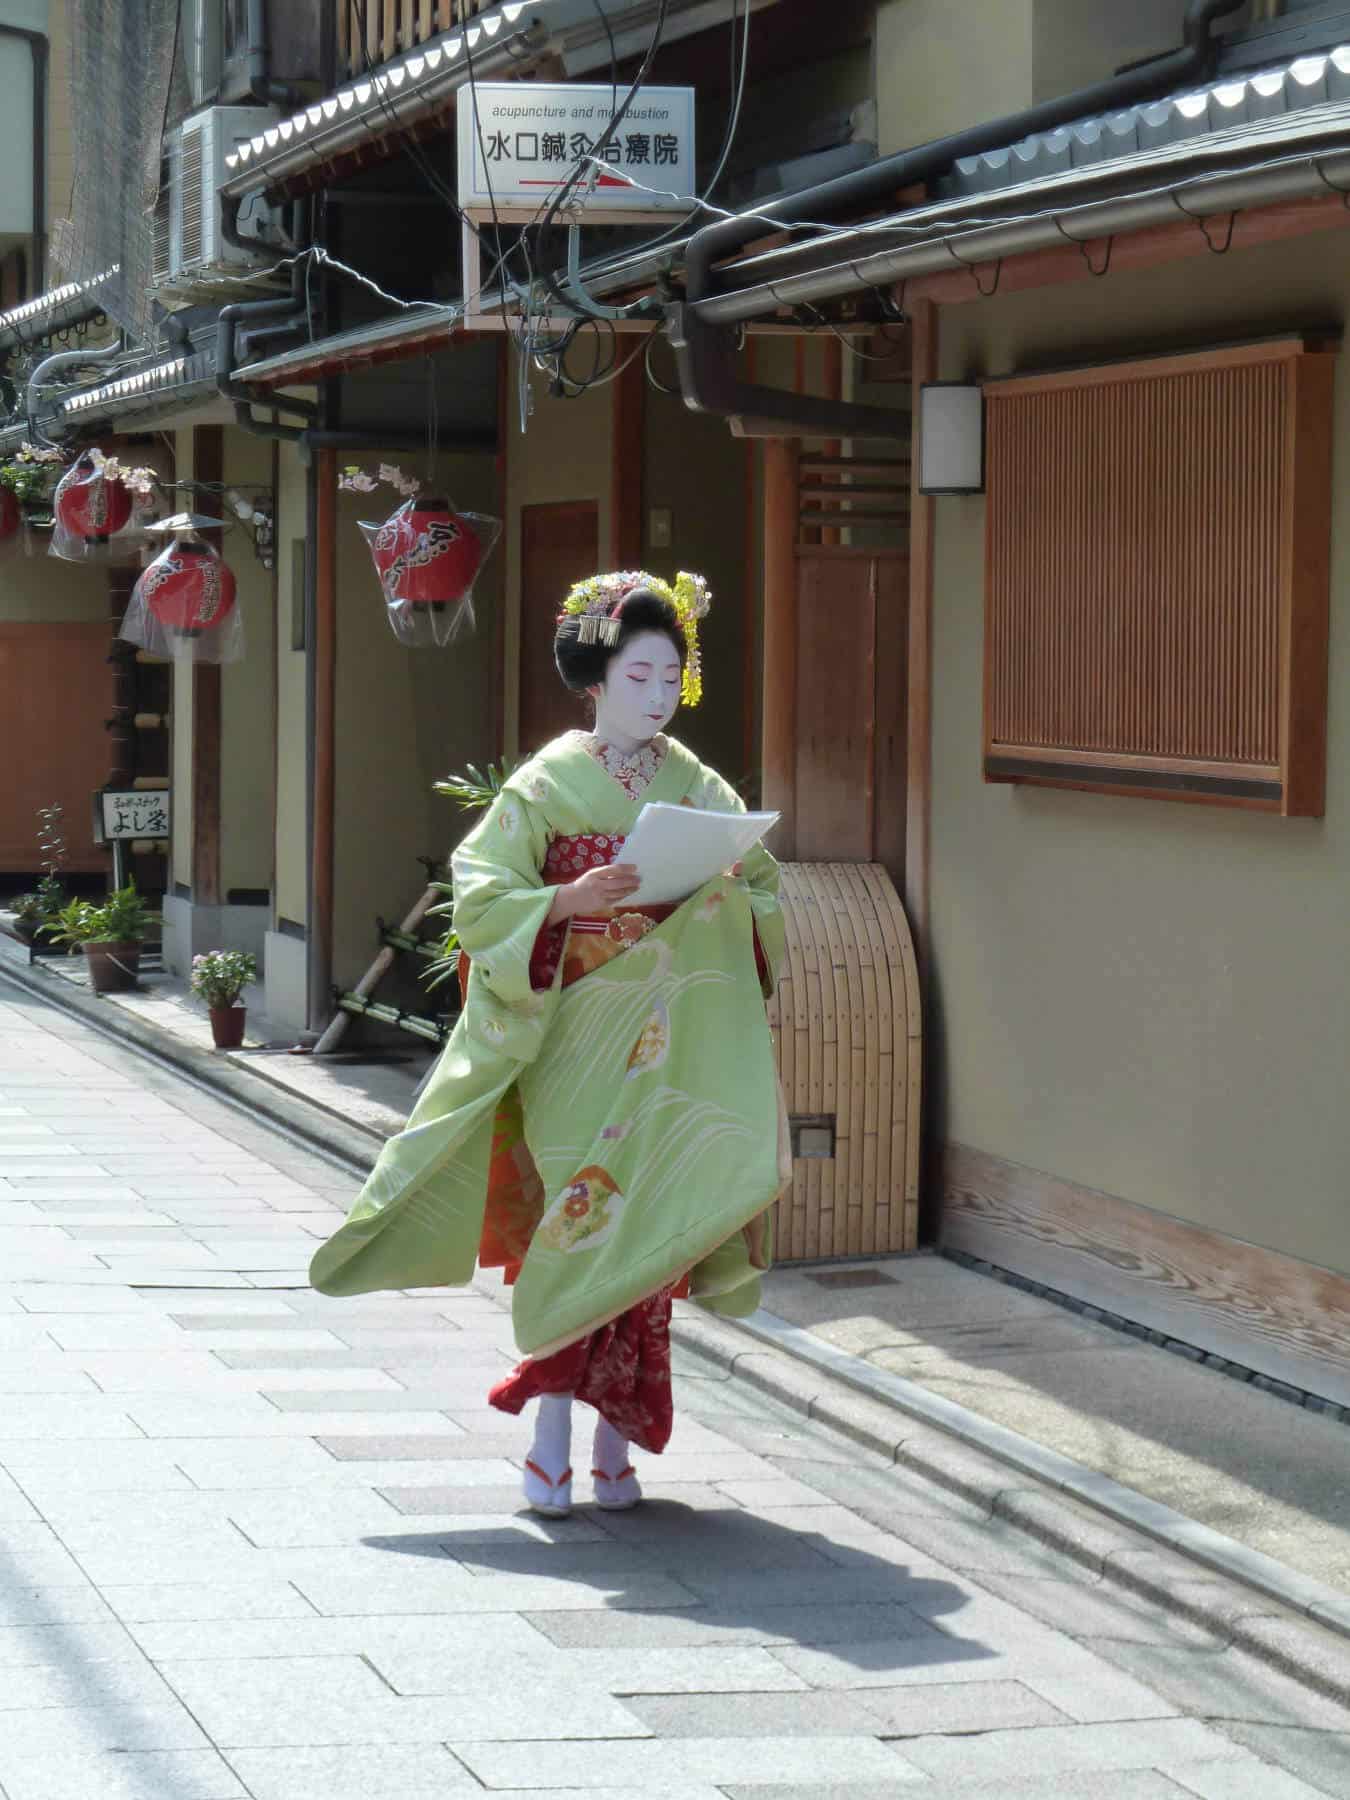 Maiko in a hurry